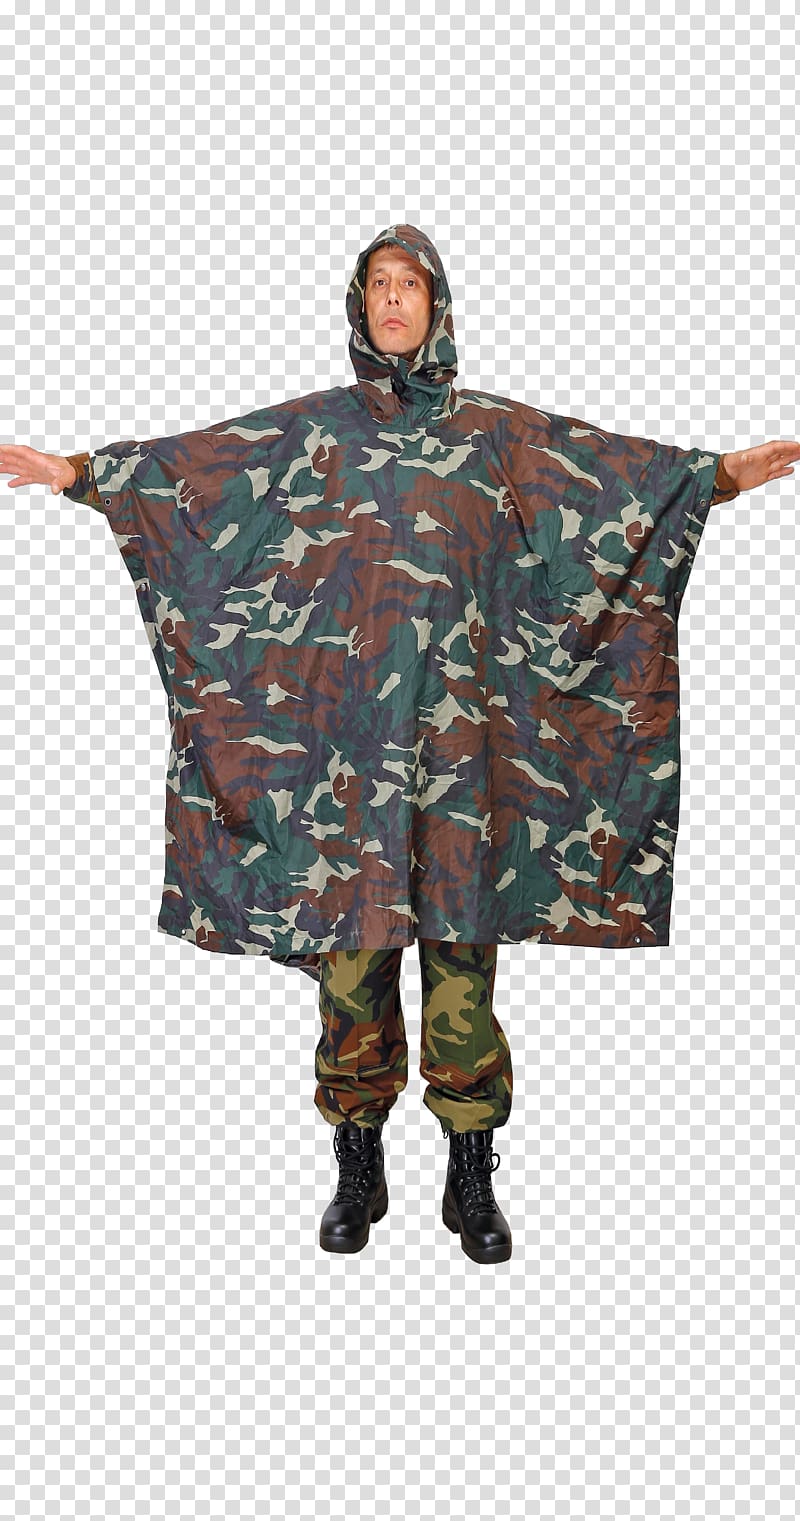 Military camouflage Military uniform Outerwear, military transparent background PNG clipart